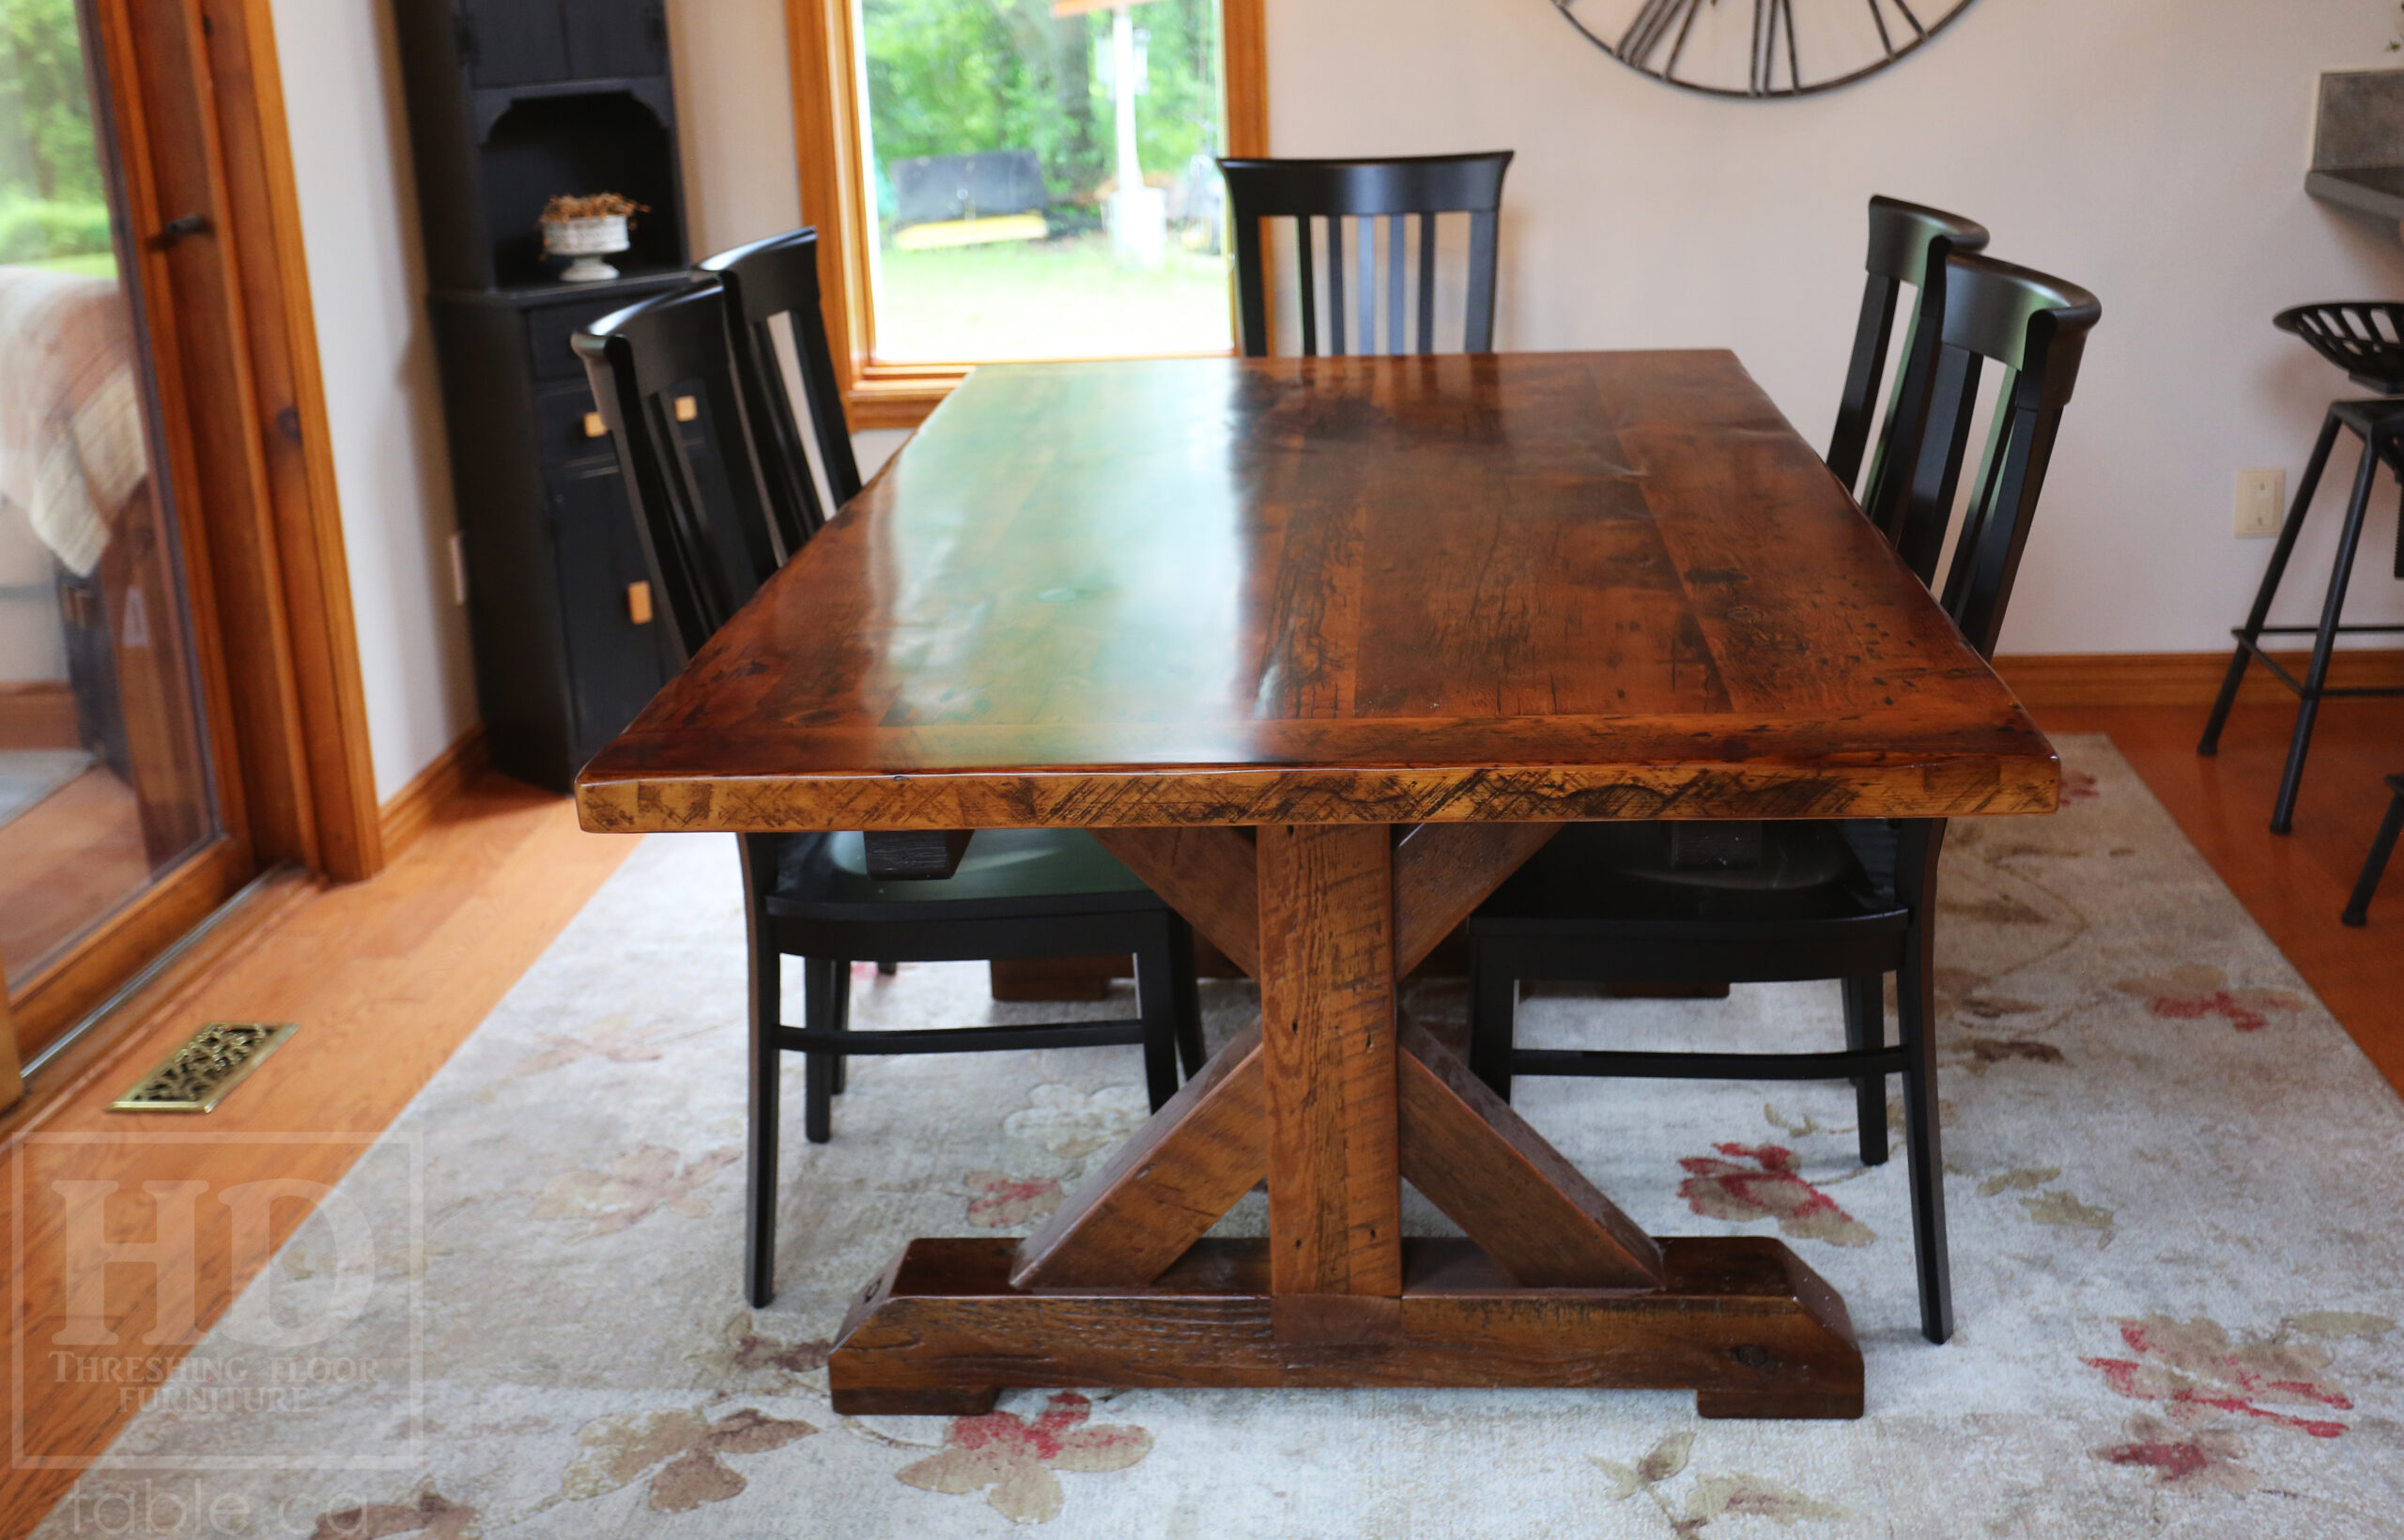 Project Summary: 6.5’ Reclaimed Barnwood Table we made for a Pakenham, Ontario home – 42” wide - Sawbuck Beam Option Base - Old Growth Hemlock Threshing Floor 2” Construction - Original edges & distressing maintained – Bread Edge Boards – Premium epoxy [light coating / less thick option] + satin polyurethane finish – One 12” Leaf – Wormy Maple Athena Chairs / Painted Solid Black - www.table.ca